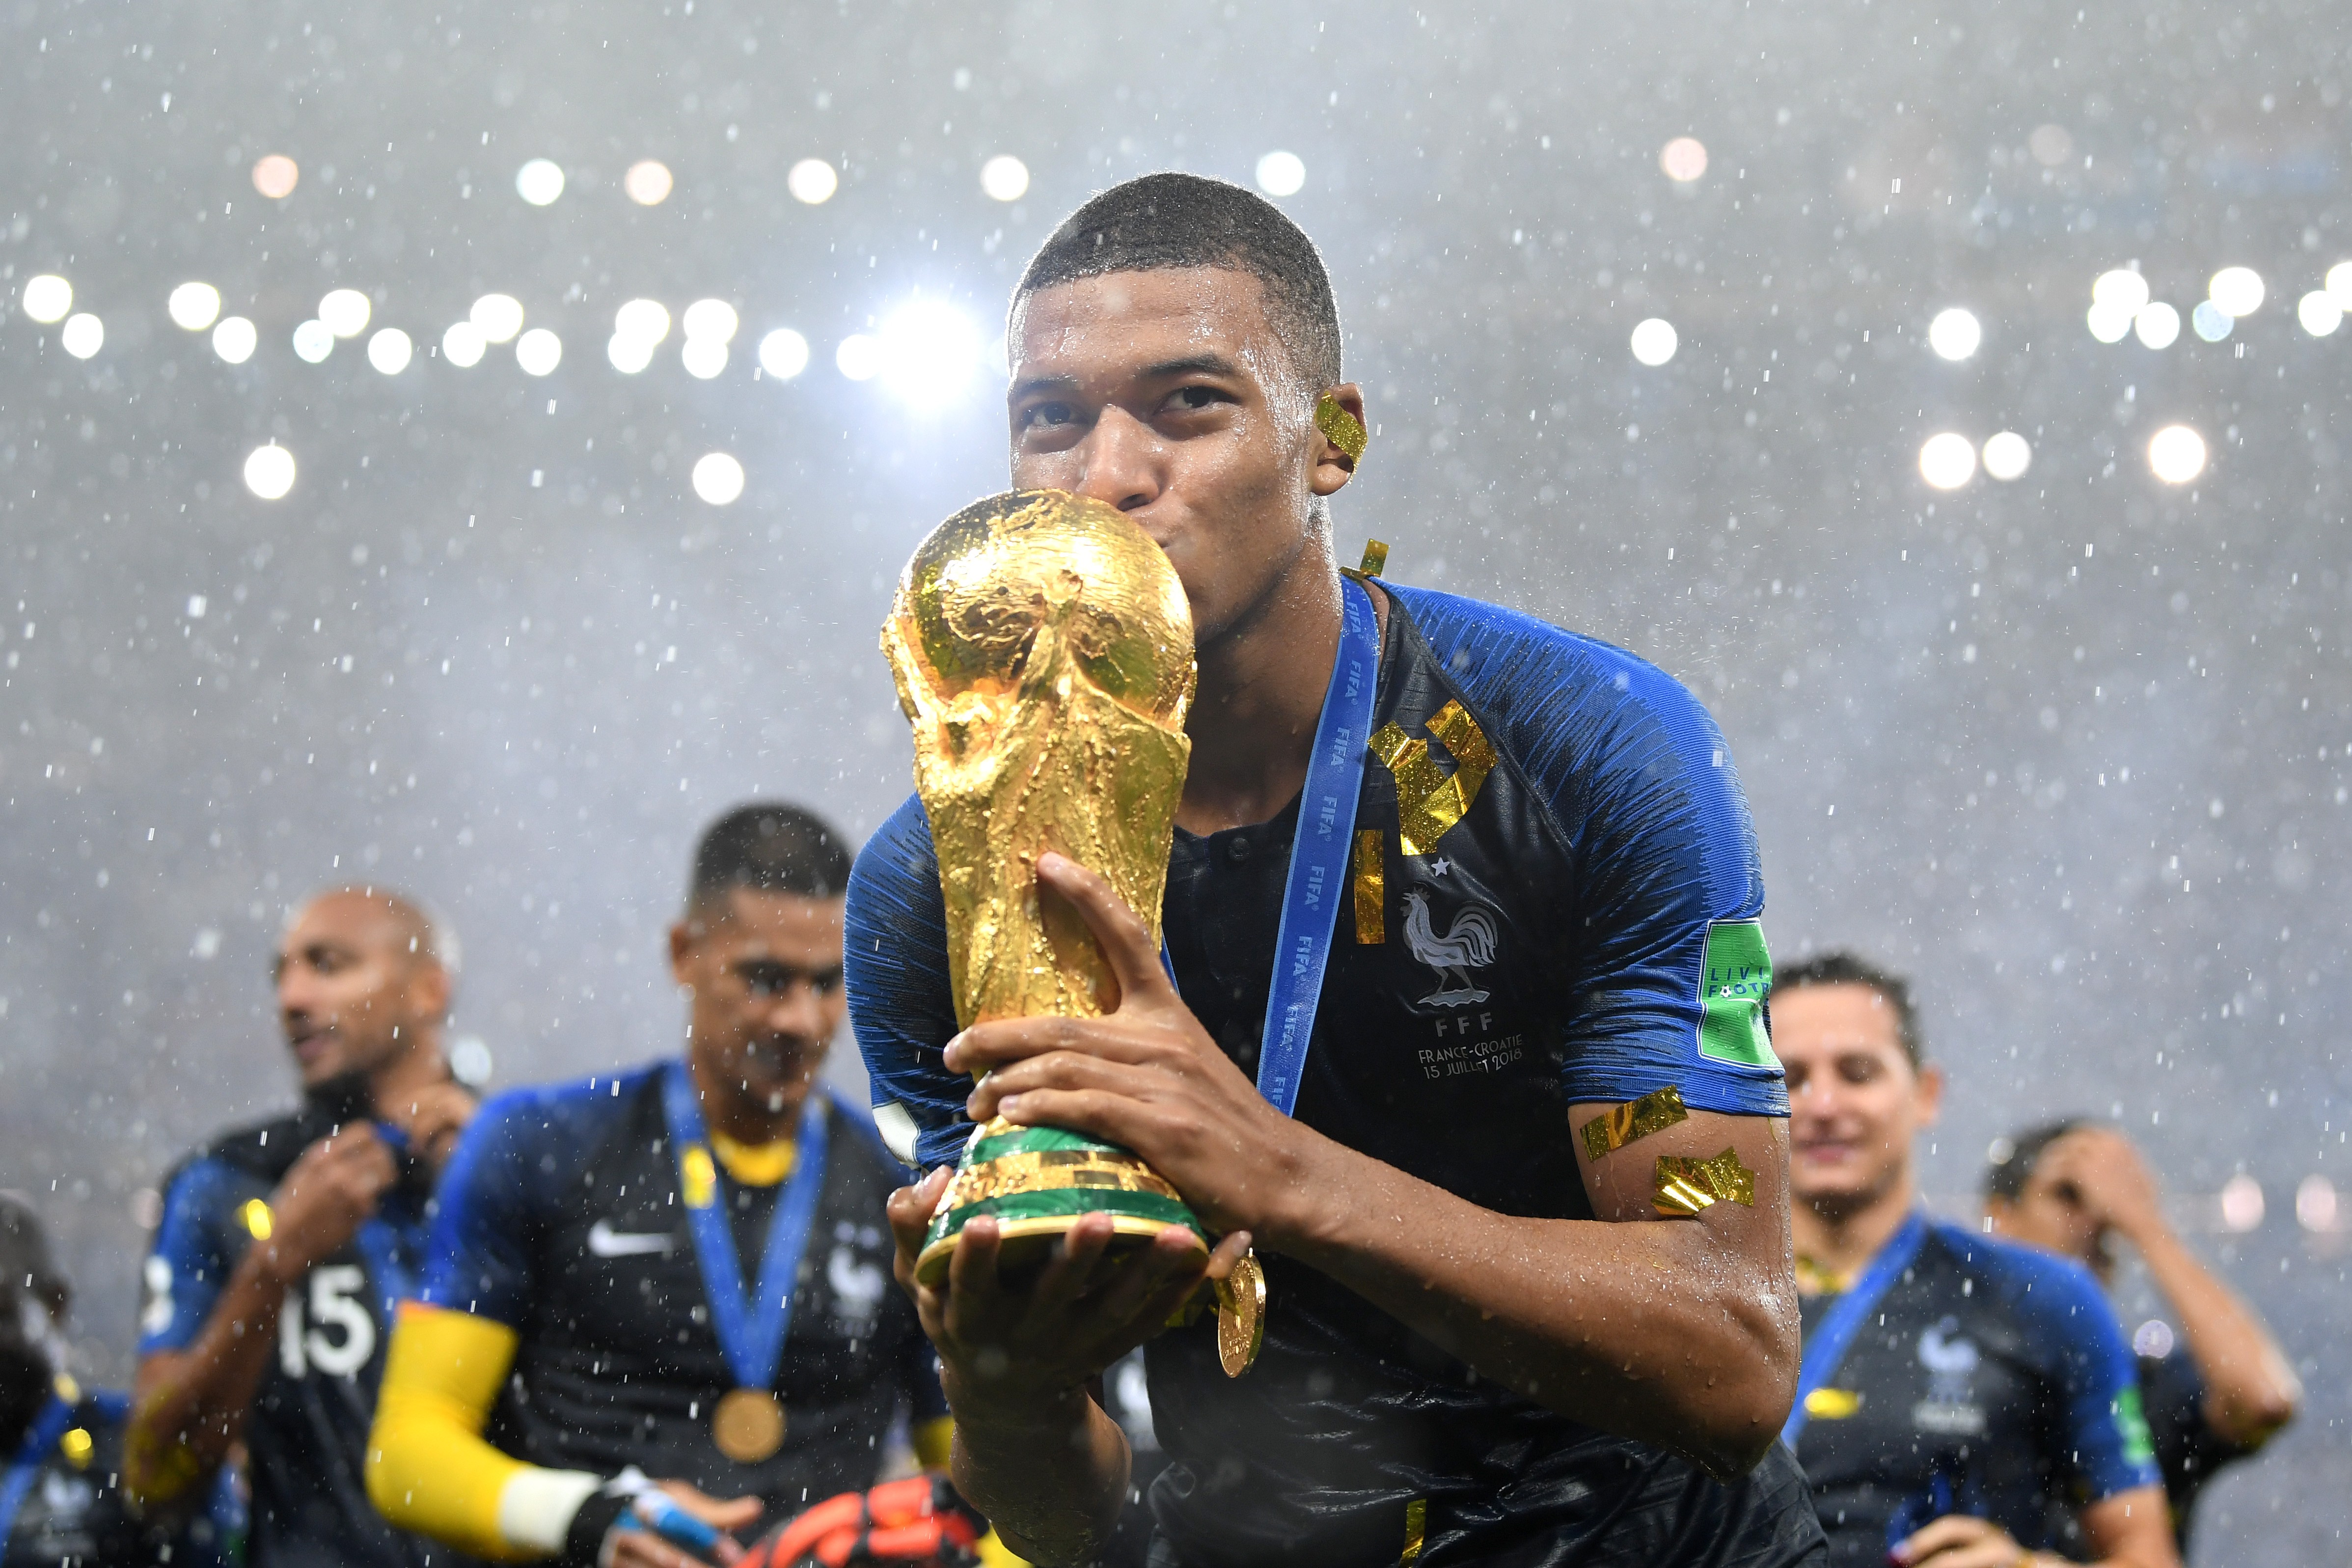 MOSCOW, RUSSIA - JULY 15:  Kylian Mbappe of France celebrates with the World Cup trophy following the 2018 FIFA World Cup Final between France and Croatia at Luzhniki Stadium on July 15, 2018 in Moscow, Russia.  (Photo by Matthias Hangst/Getty Images) (Foto: Getty Images)